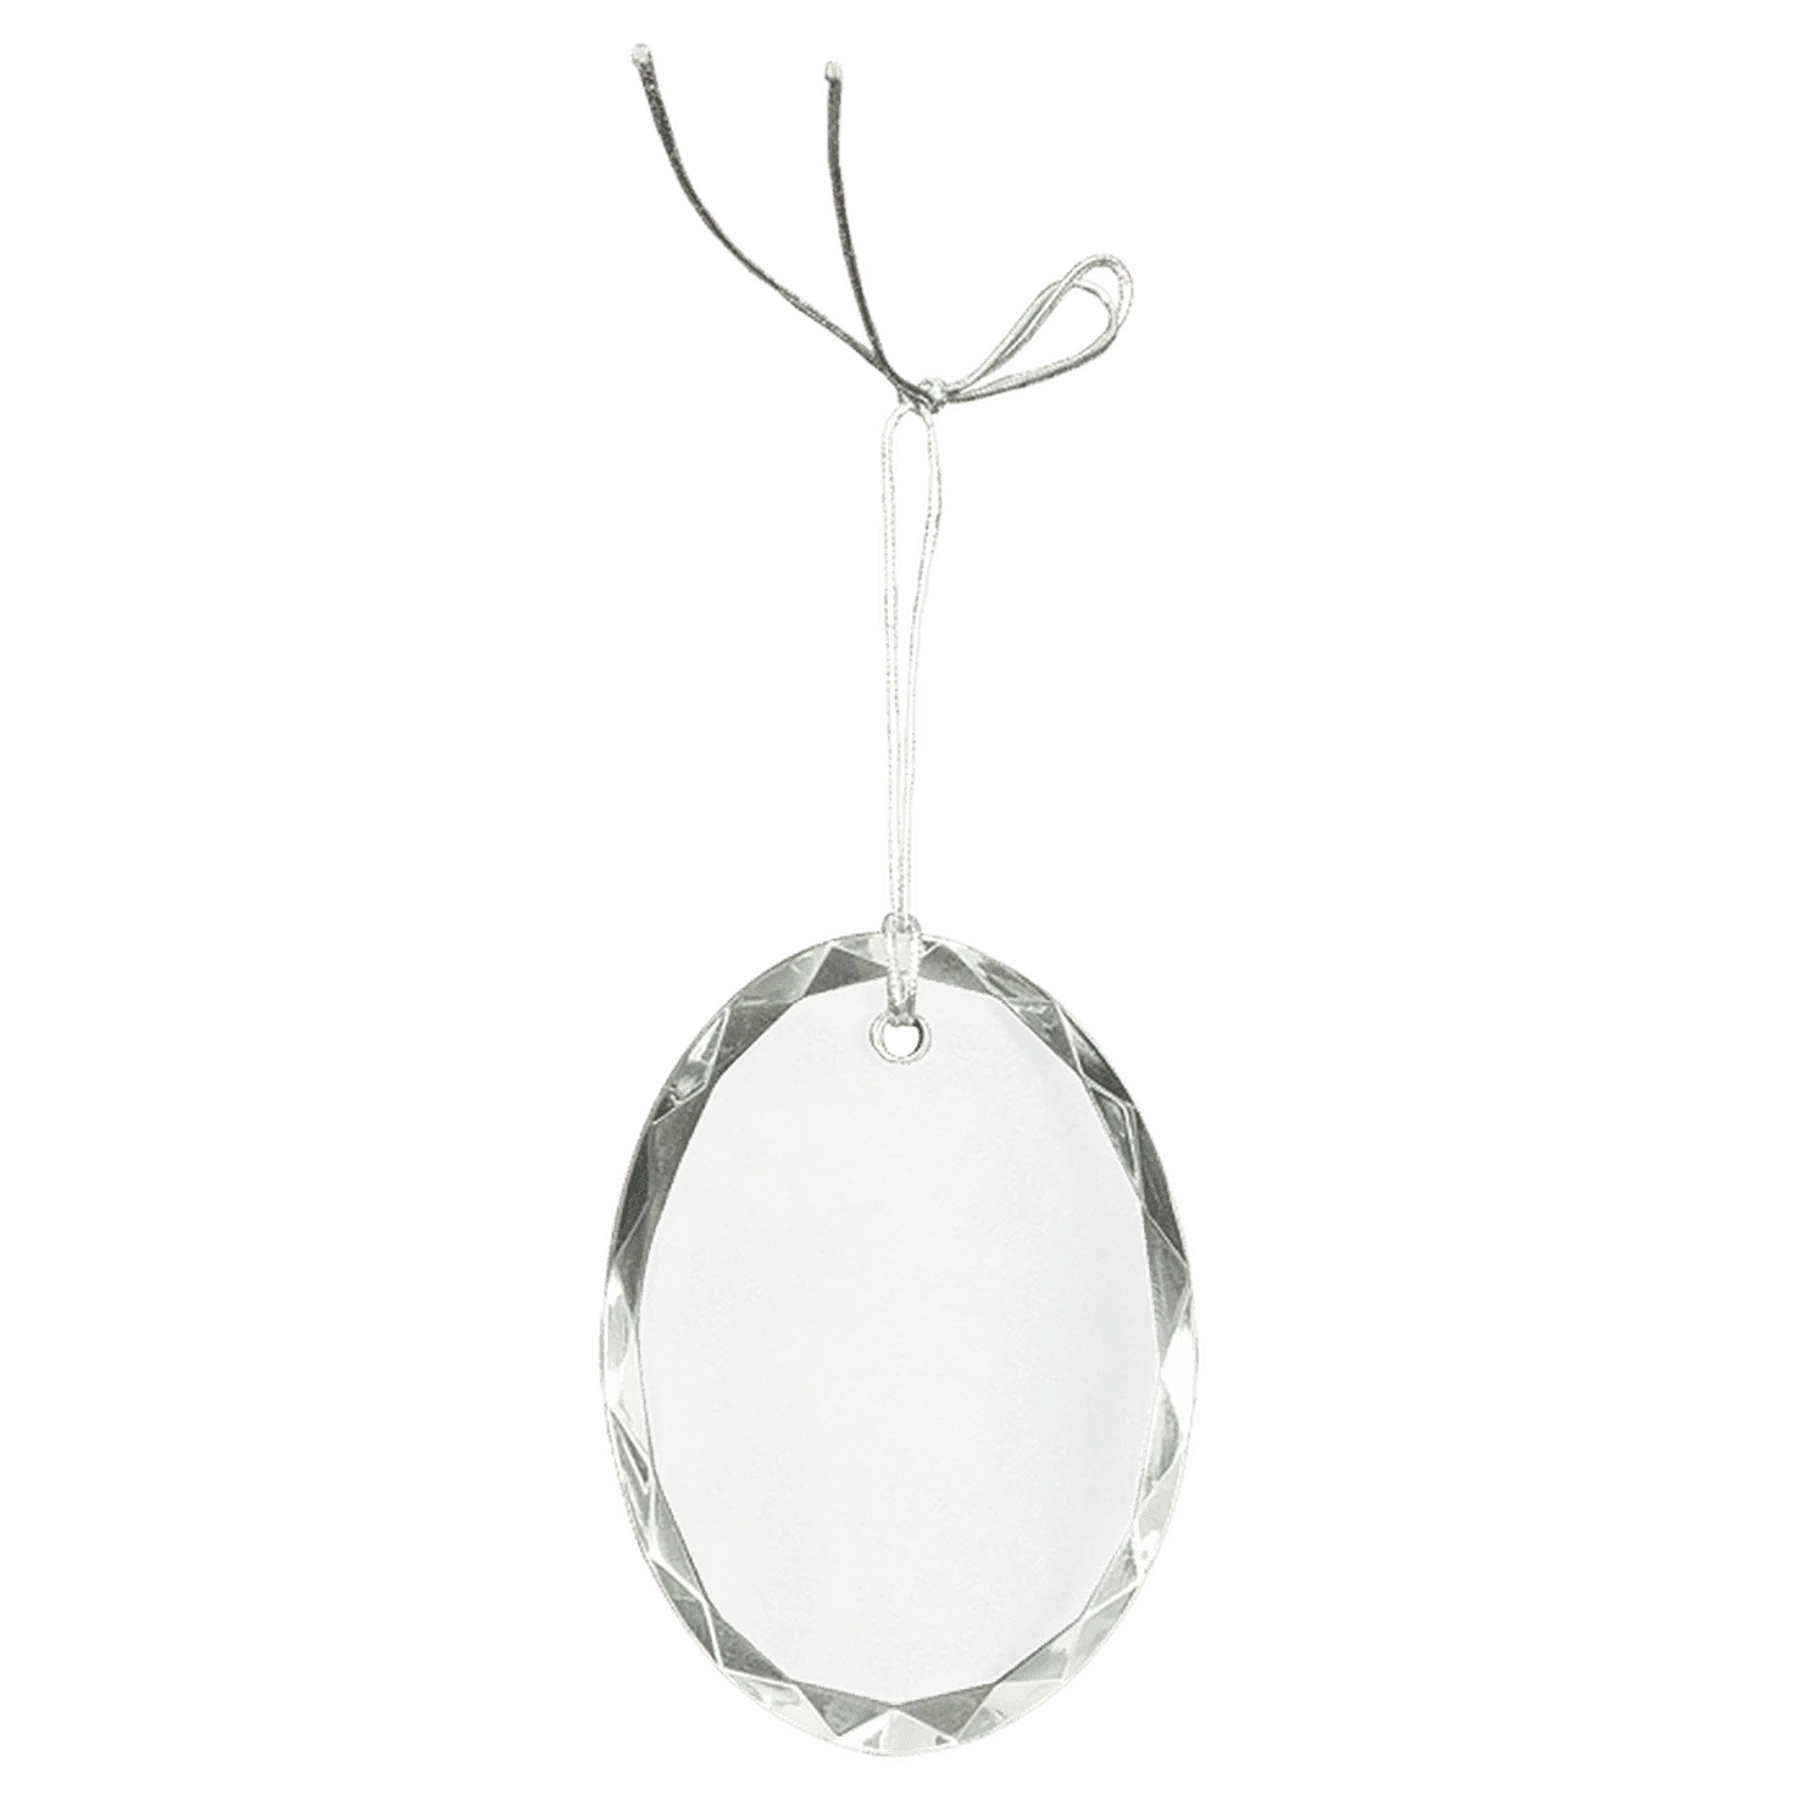 3" Faceted Crystal Oval Ornament with Silver String